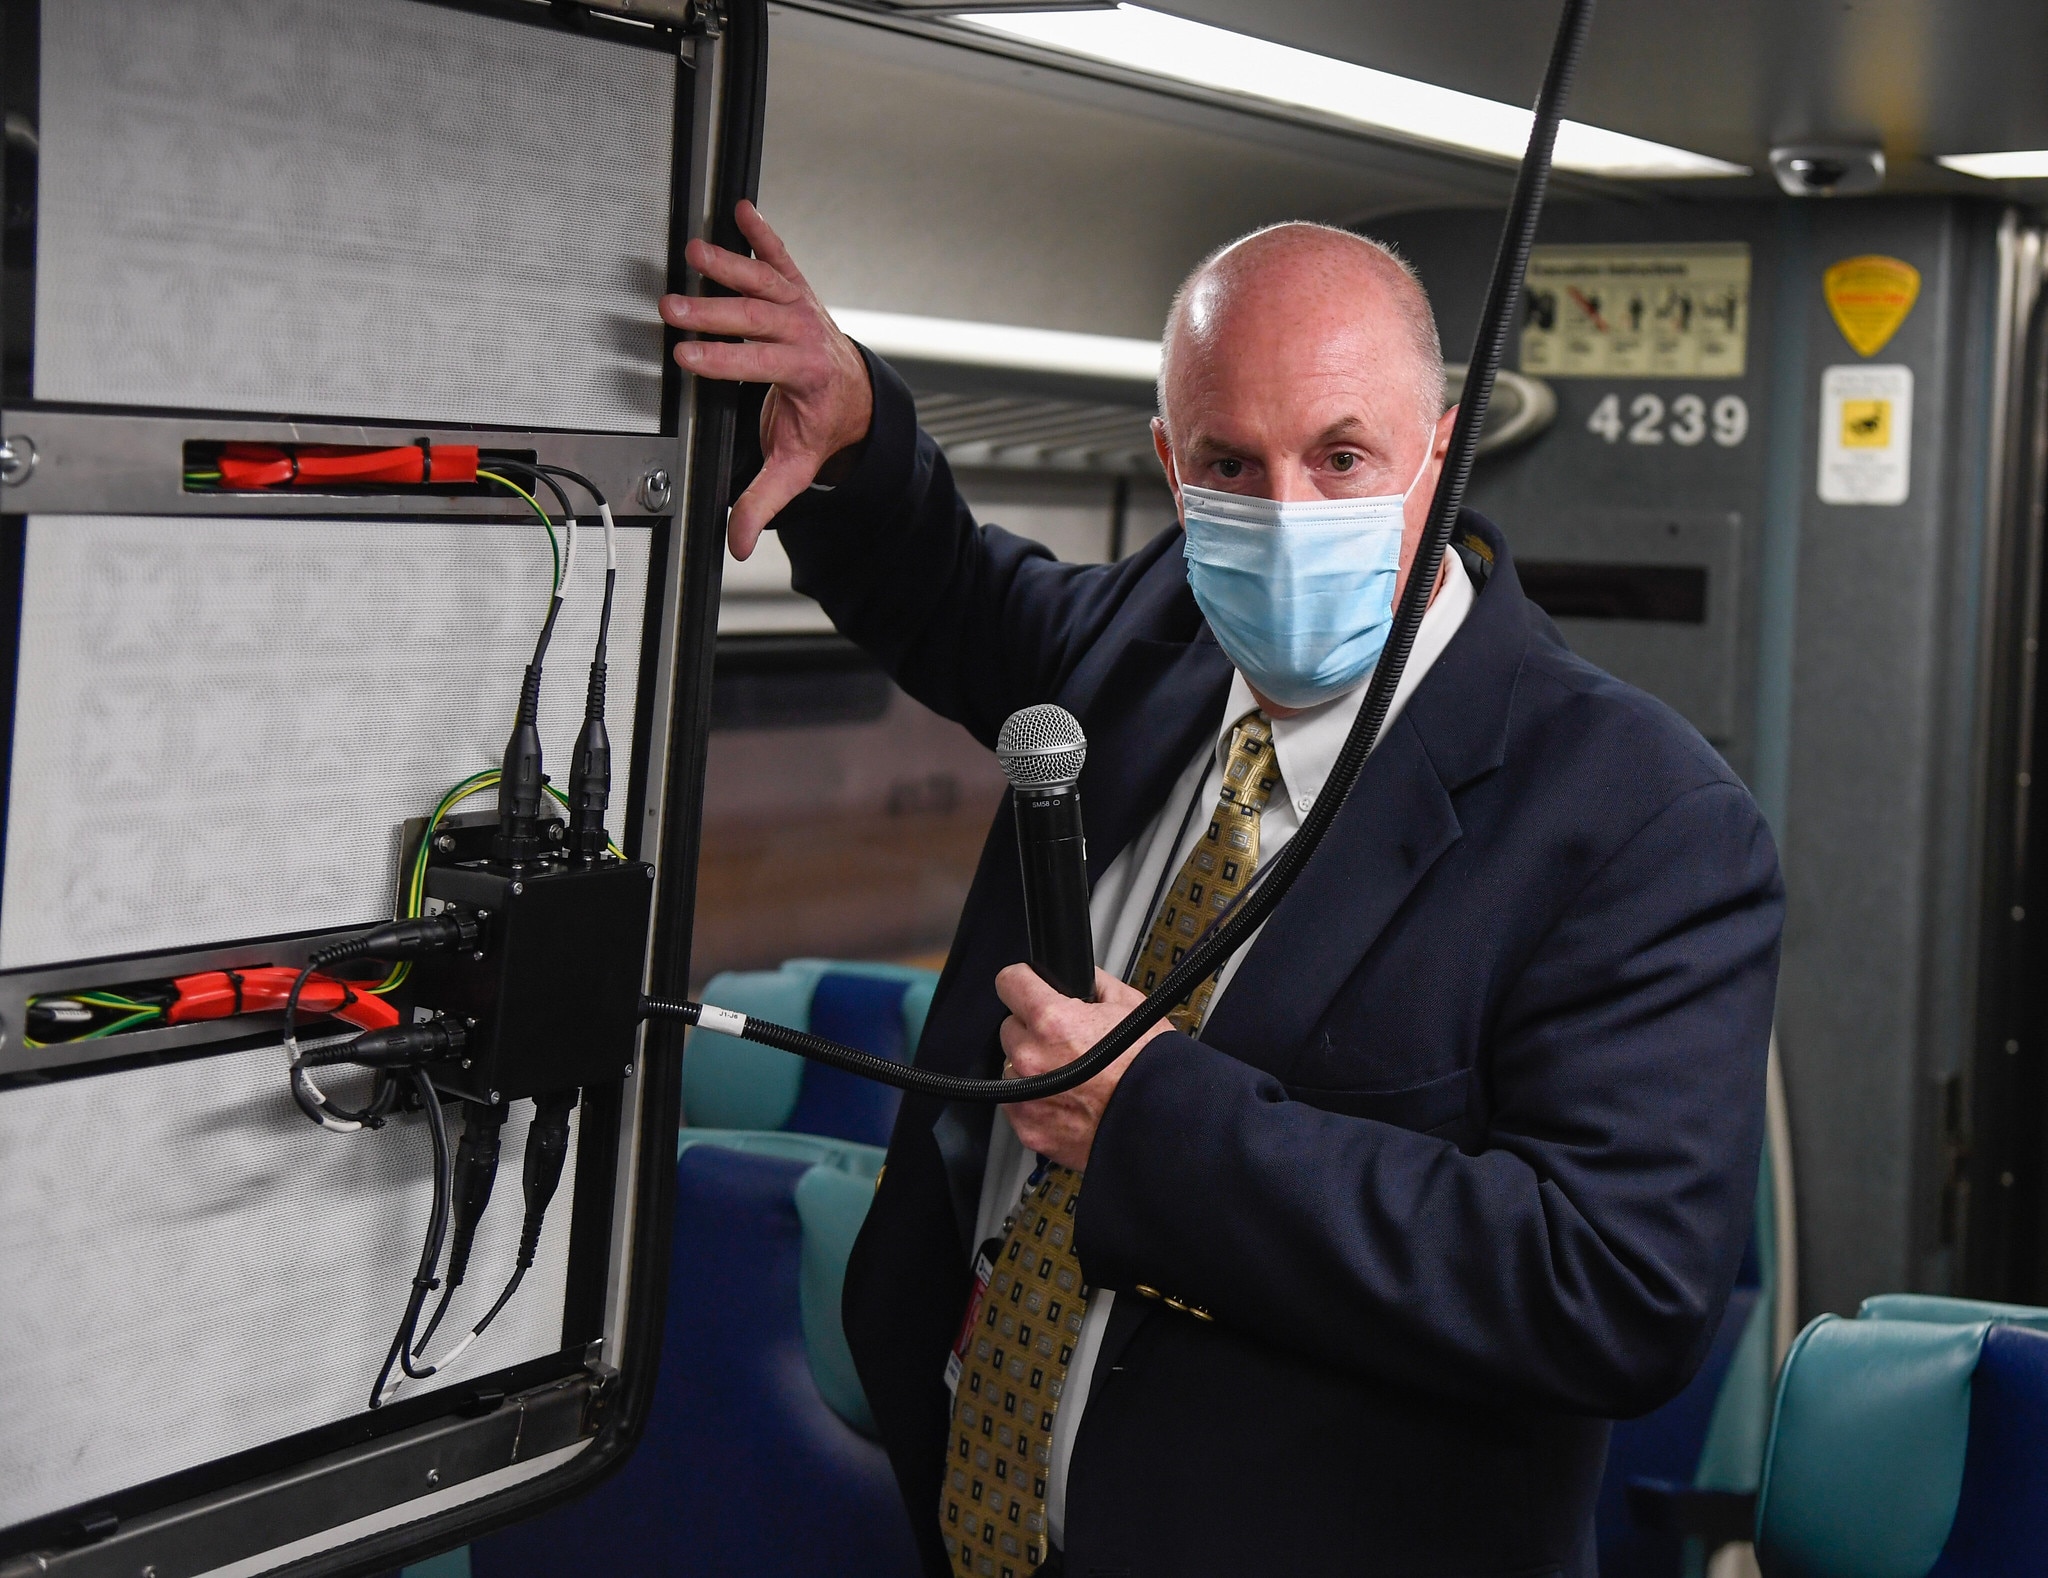 MTA Piloting State-of-the-Art Air Filtration and Purification System on Commuter Rails